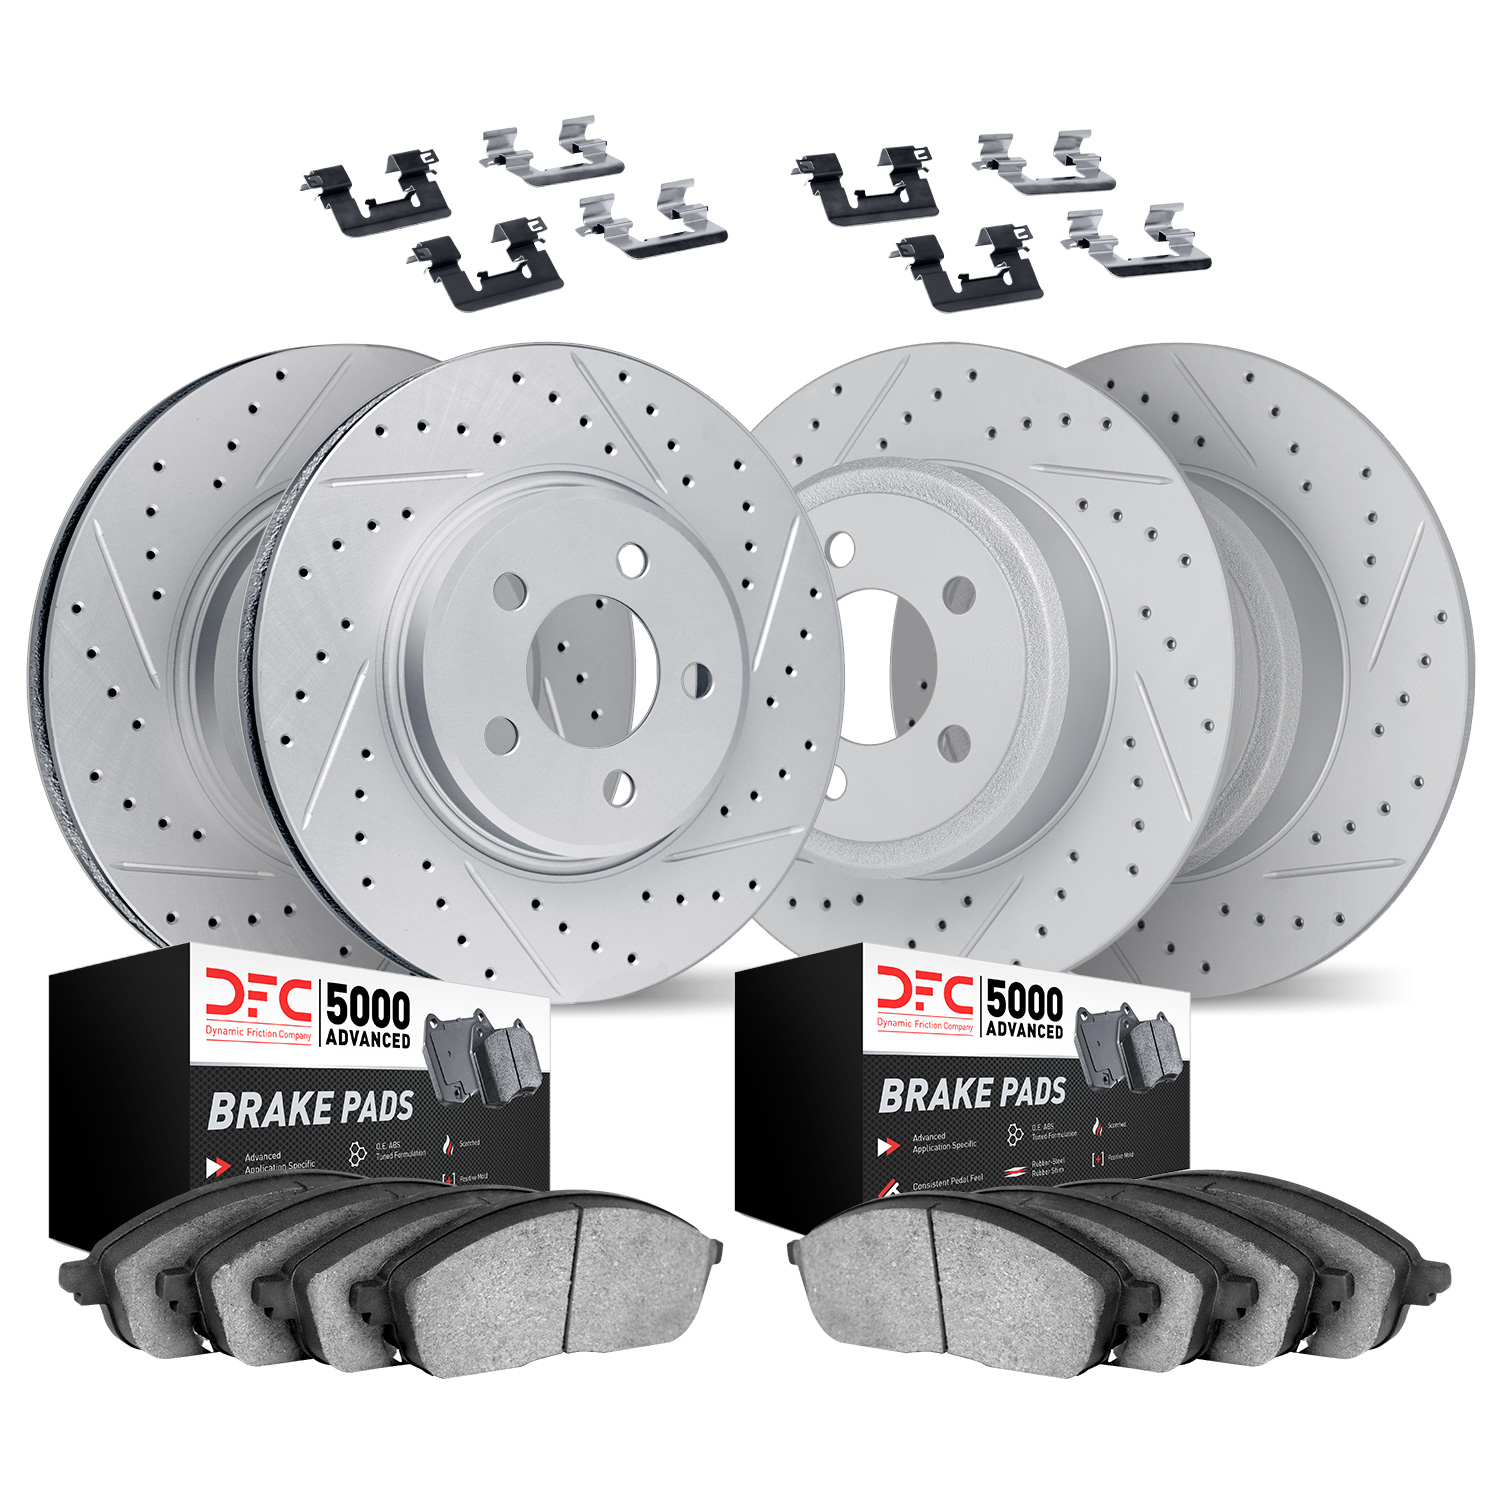 2514-40091 Geoperformance Drilled/Slotted Rotors w/5000 Advanced Brake Pads Kit & Hardware, 2001-2007 Mopar, Position: Front and